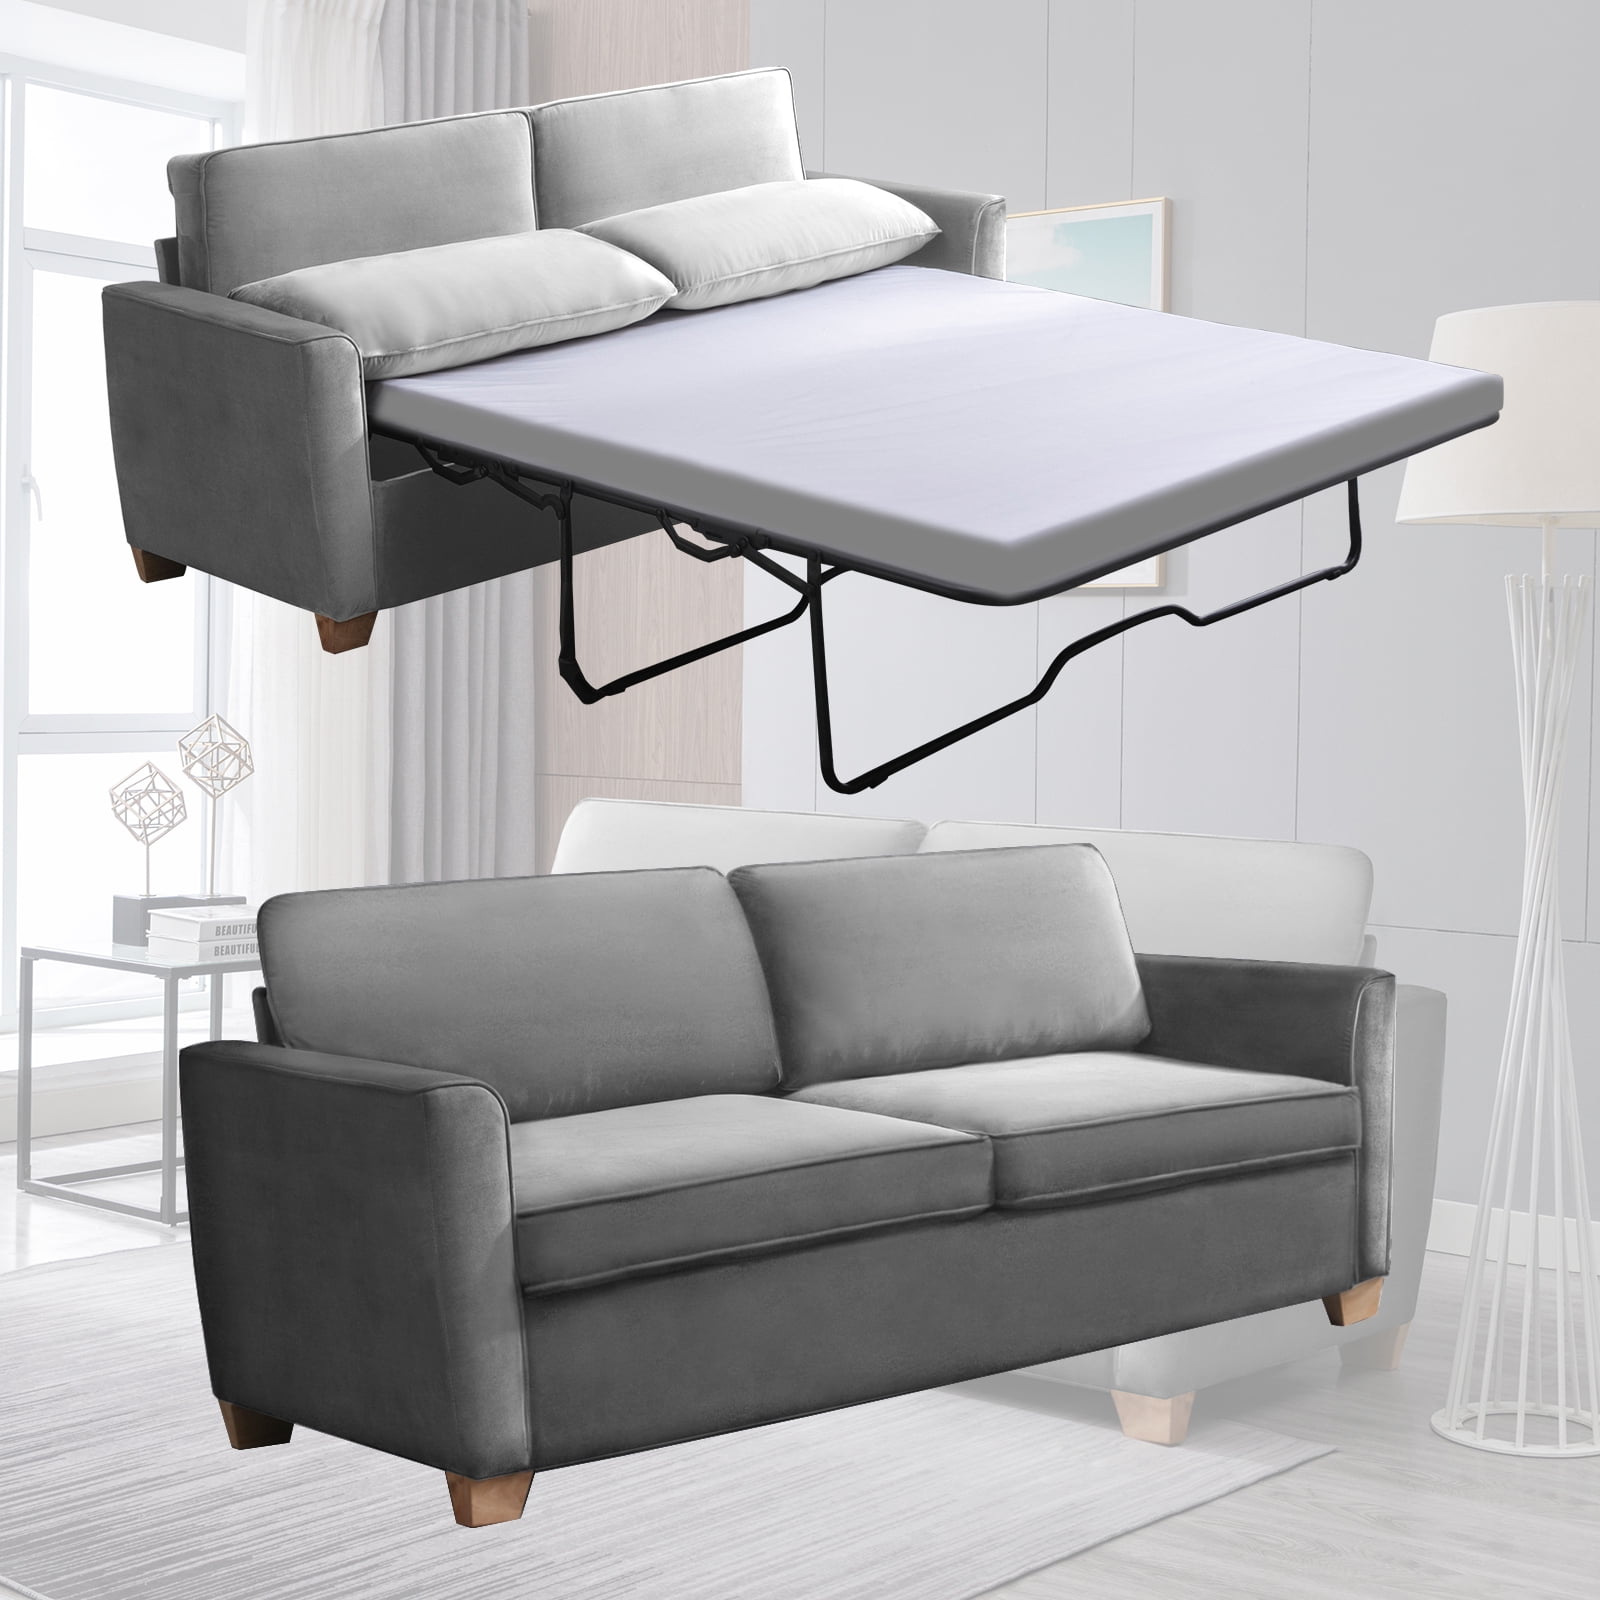 Mixoy 2 In 1 Pull Out Sofa Bed Velvet Loveseat Sleeper With Folding Mattress Couch Suitable For Living Room Full Size Apartment Small Es Queen Grey Com